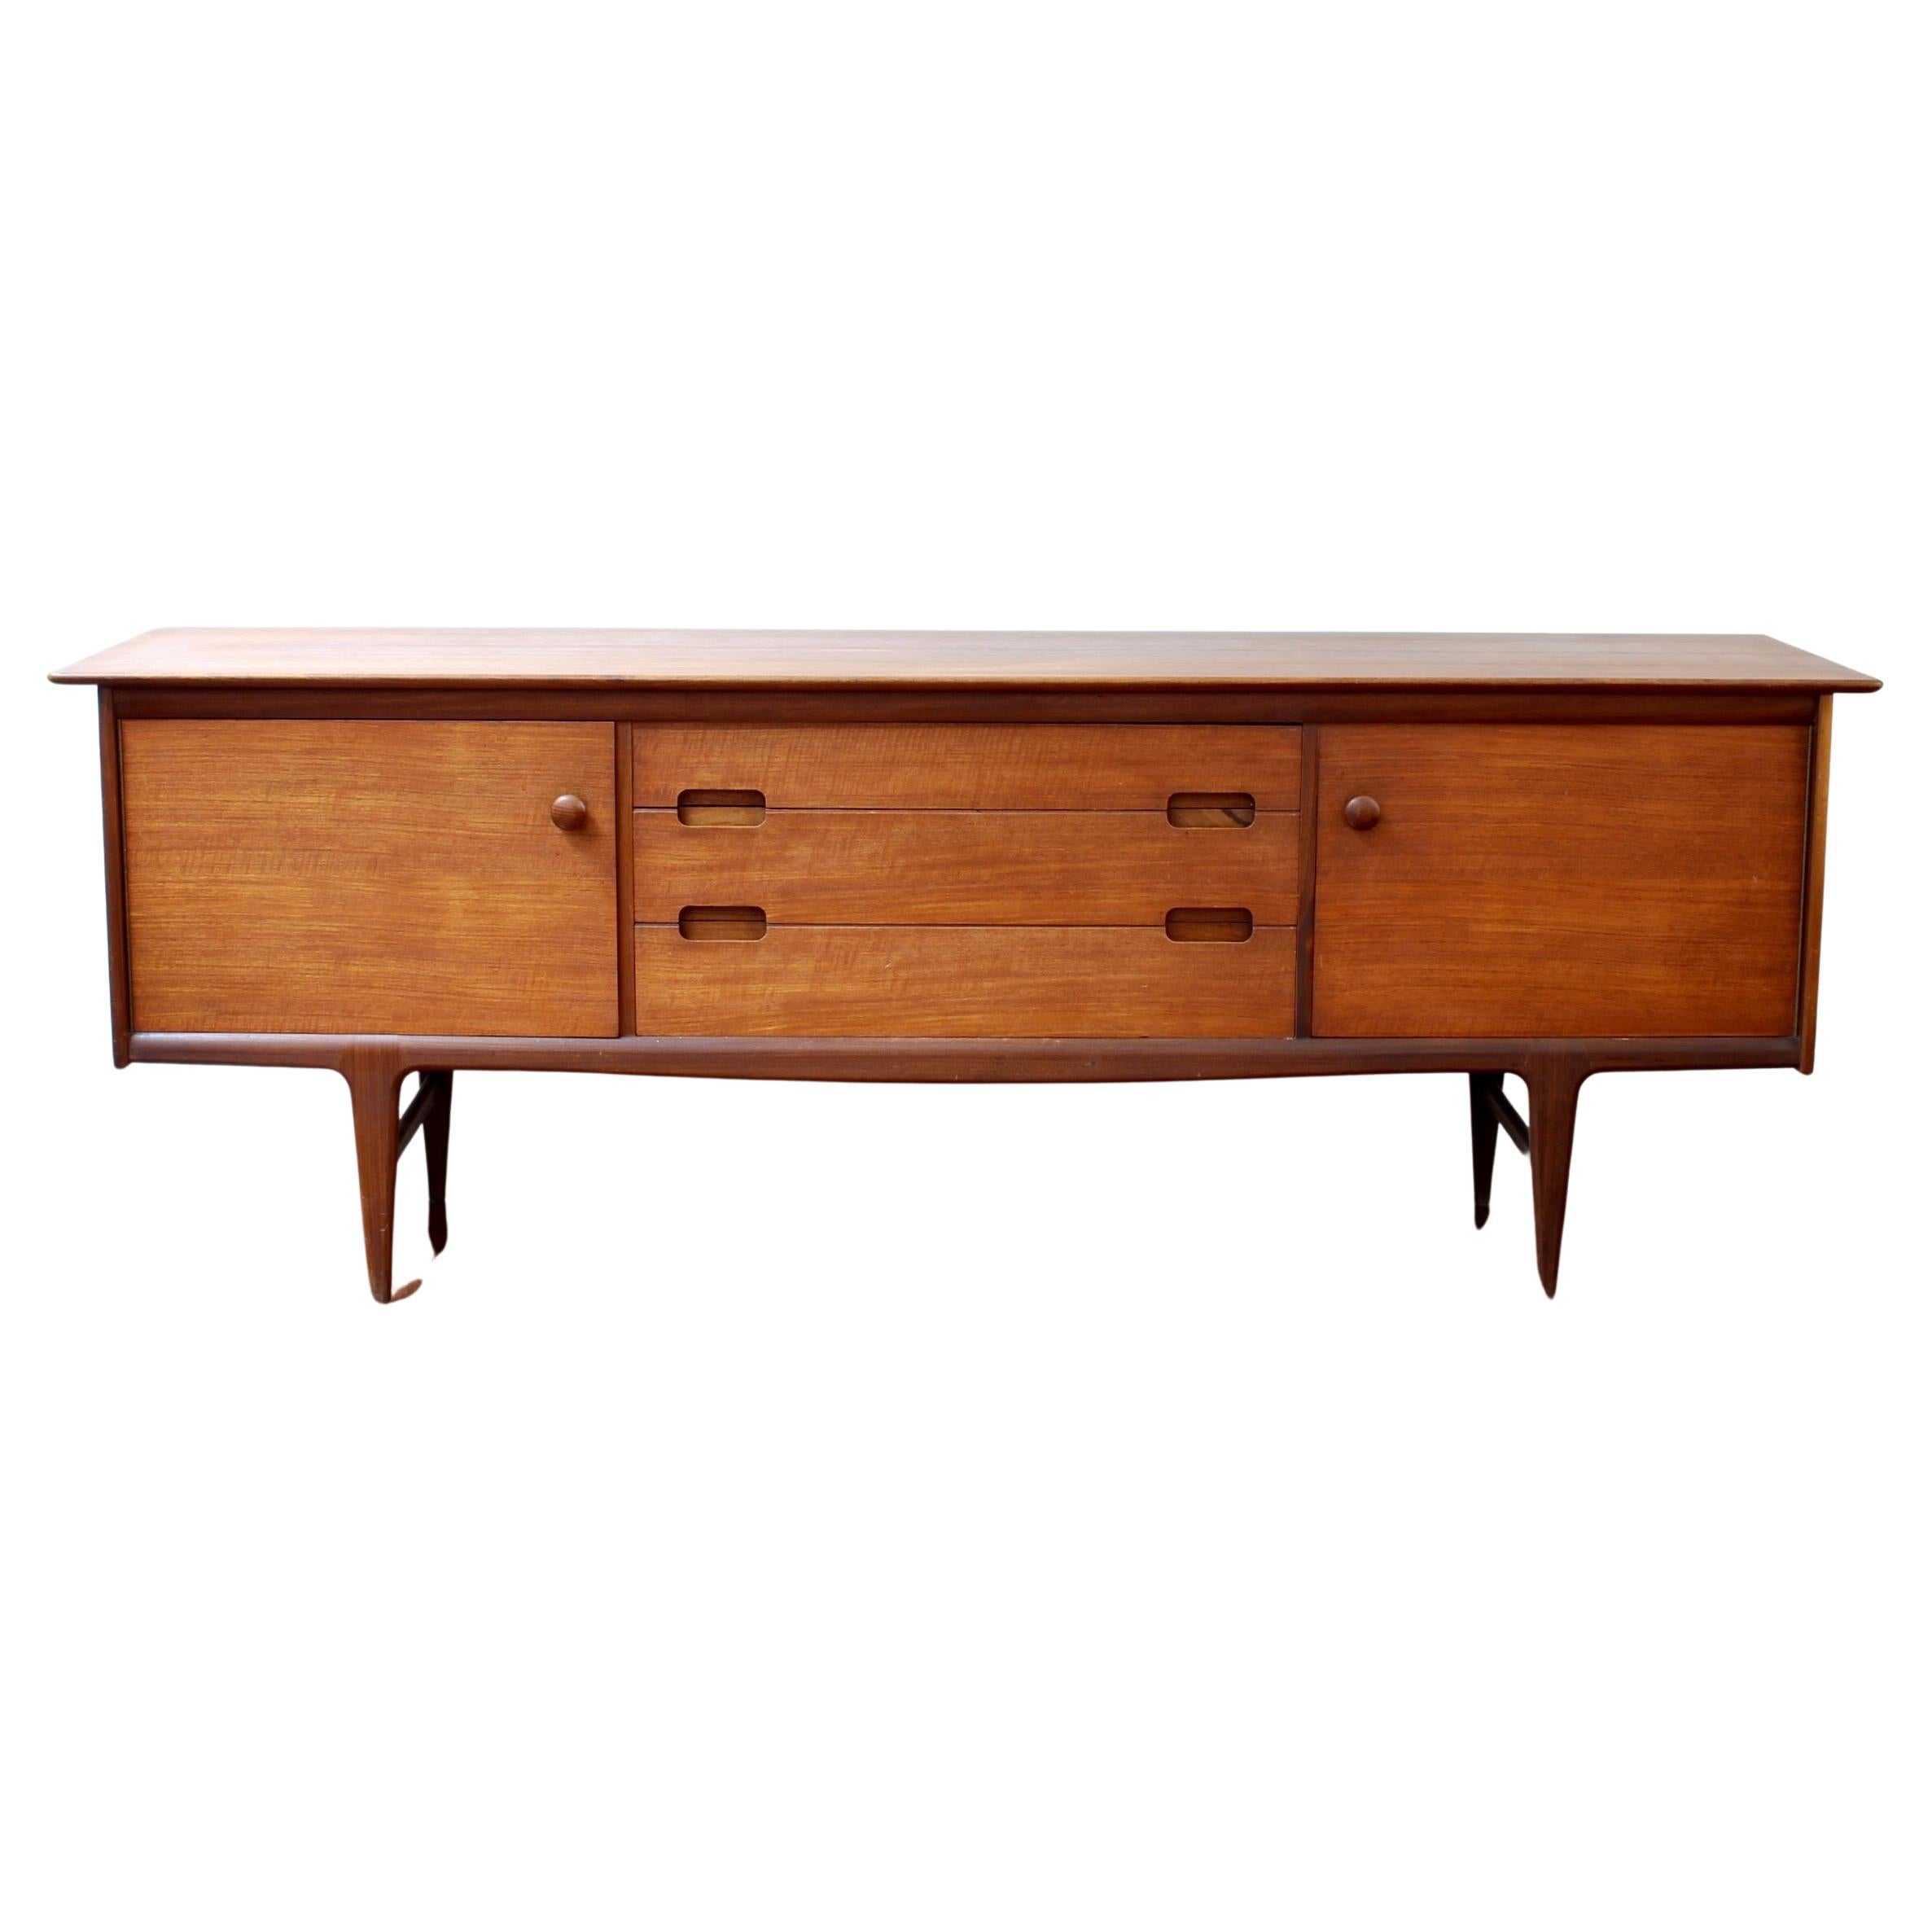 'Fonseca' Vintage Sideboard by John Herbert for A. Younger Ltd. 'circa 1950s'